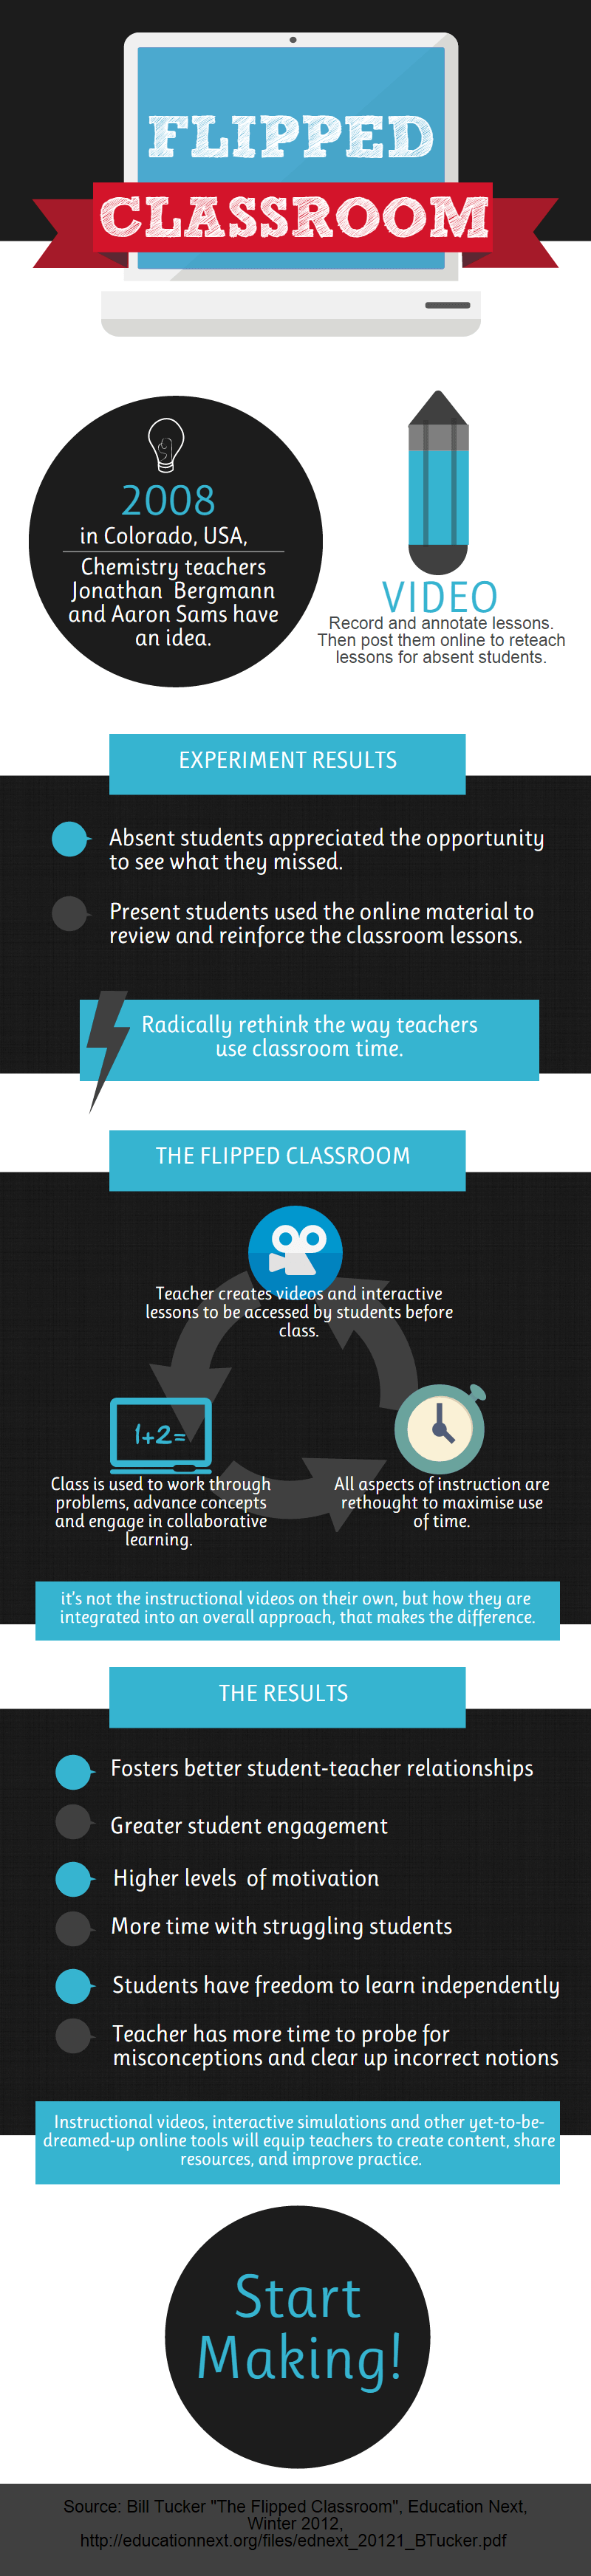 How a Flipped Classroom Works Infographic - e-Learning Infographicse-Learning Infographics thumbnail